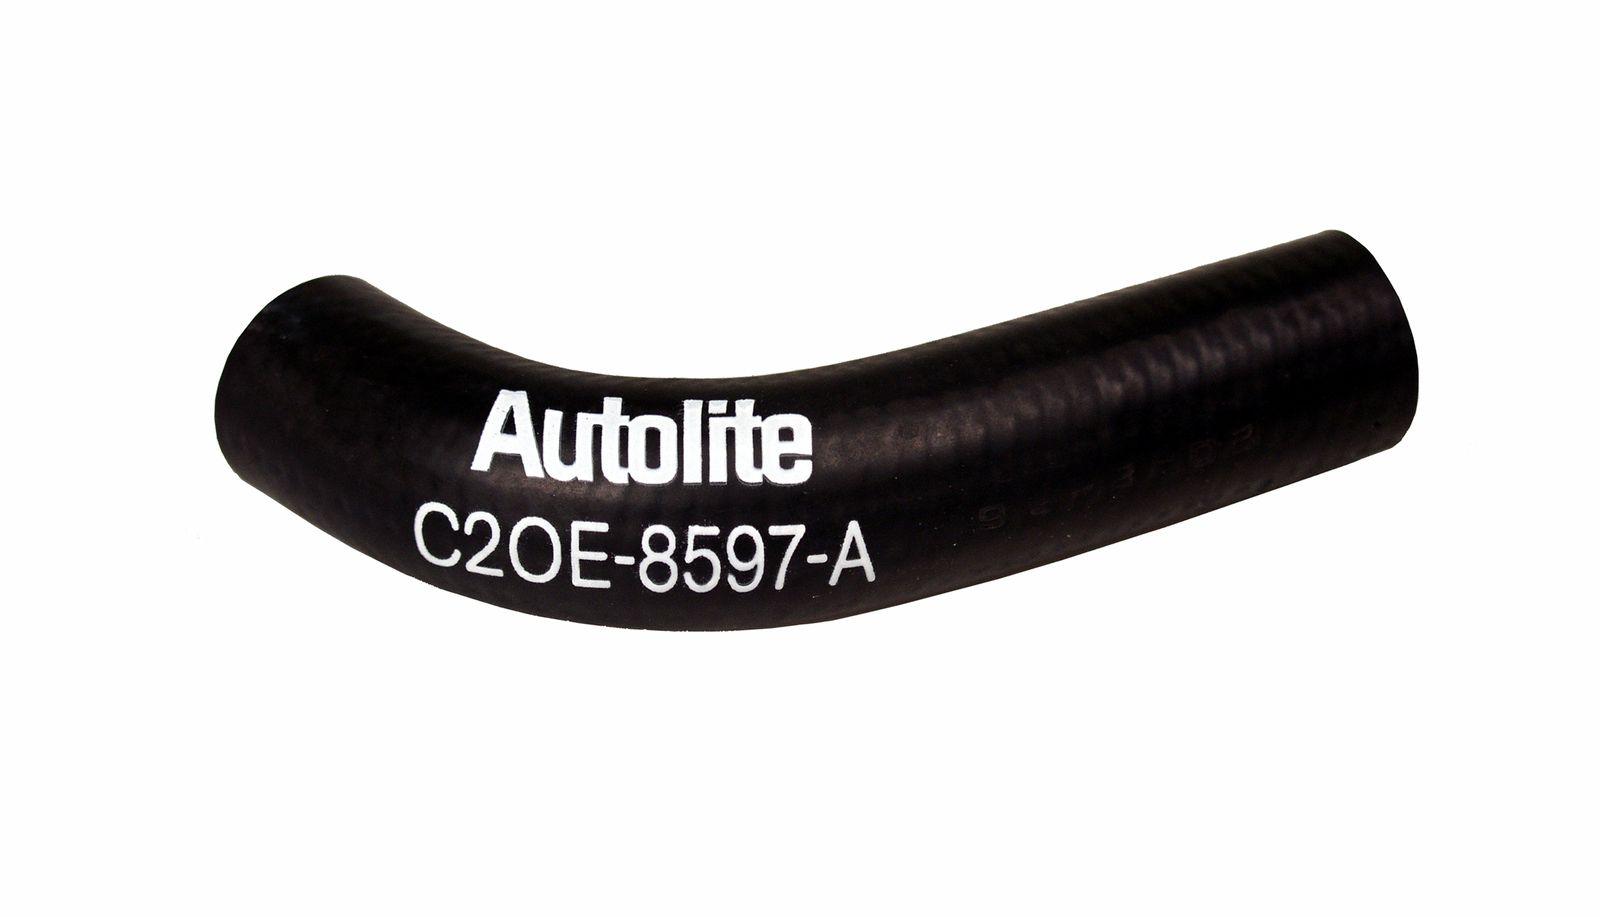 Autolite Logo - 1967 - 1971 Mustang By-Pass Hose with Autolite Logo